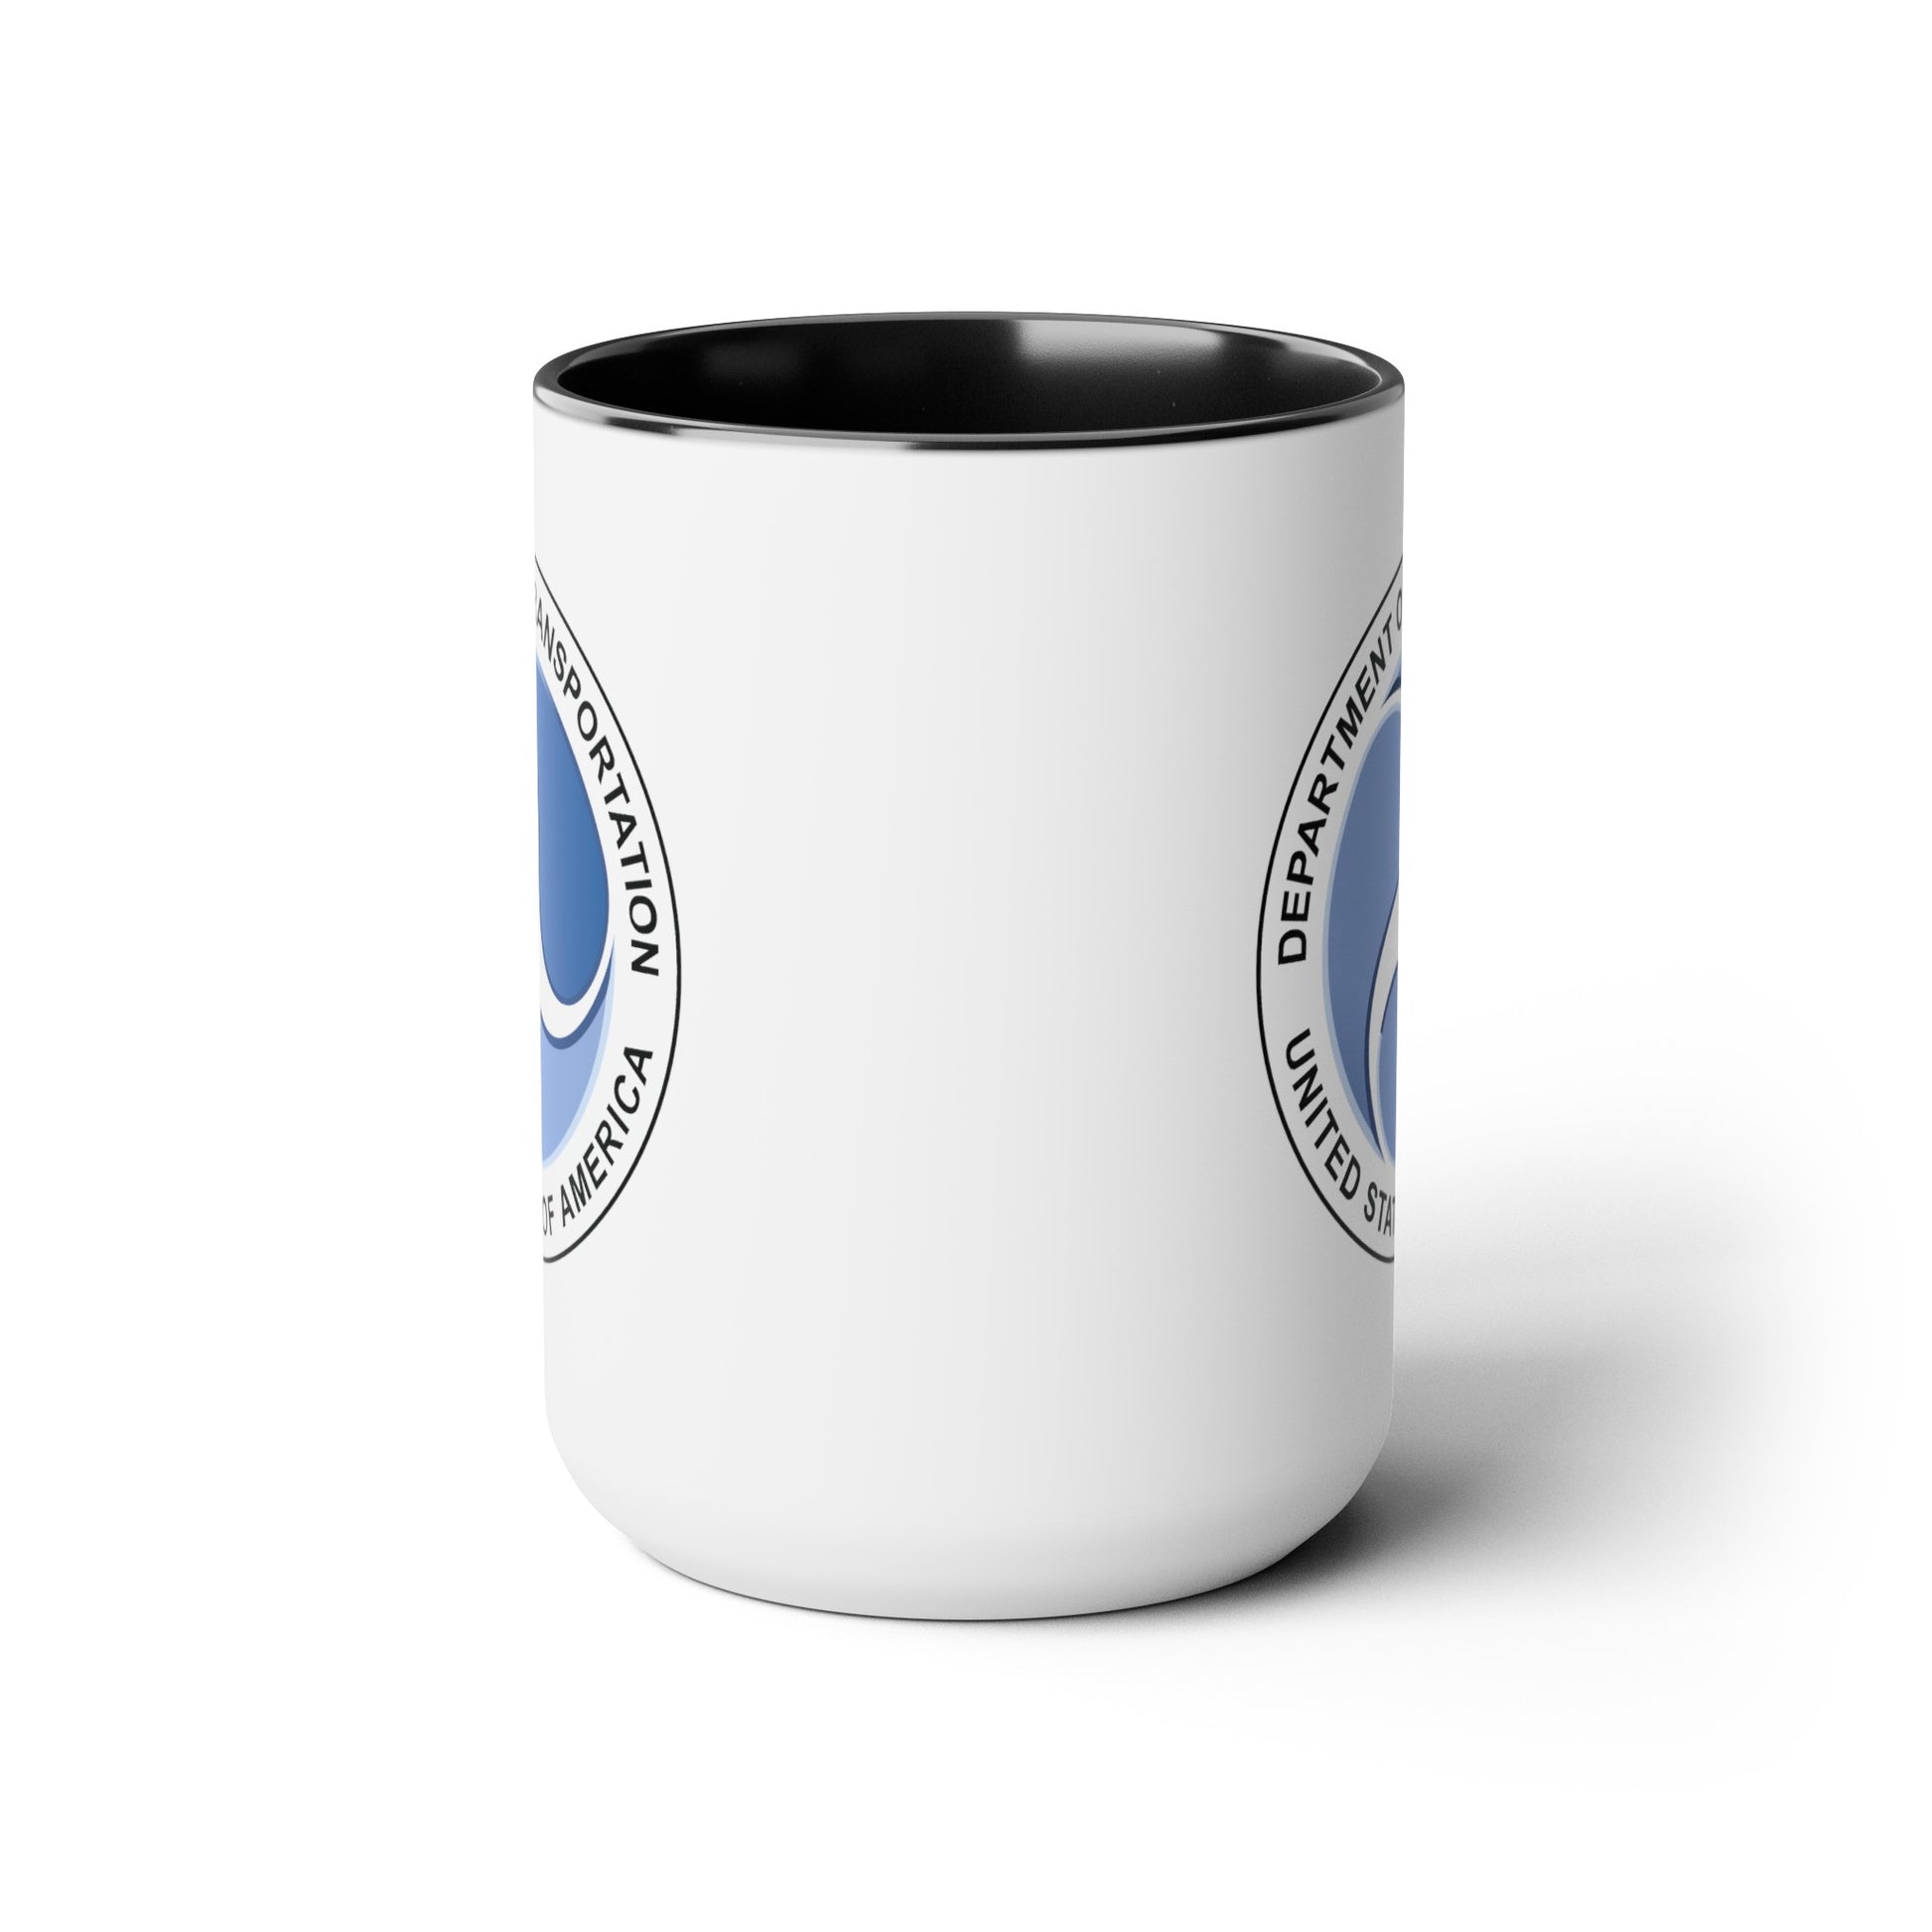 Department of Transportation Coffee Mug - Double Sided Black Accent White Ceramic 15oz by TheGlassyLass.com